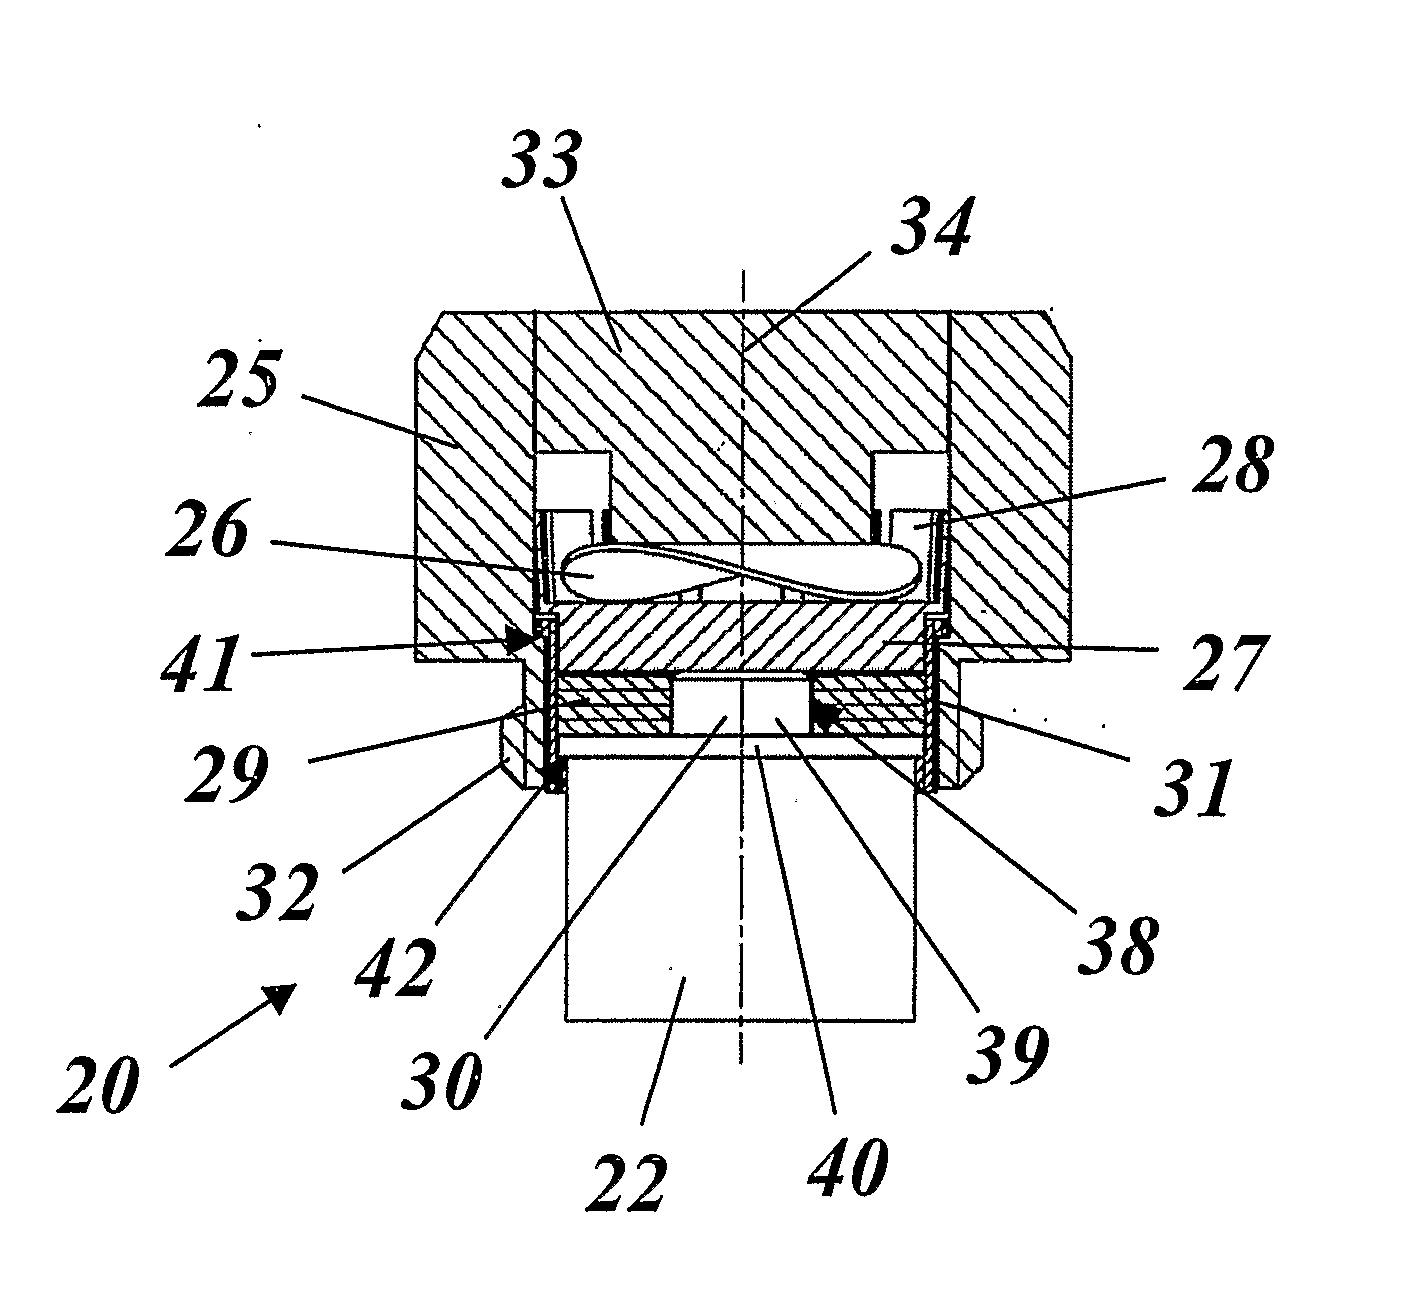 Automatically Quenching Surge Arrester Arrangement and Use of Such a Surge Arrester Arrangement